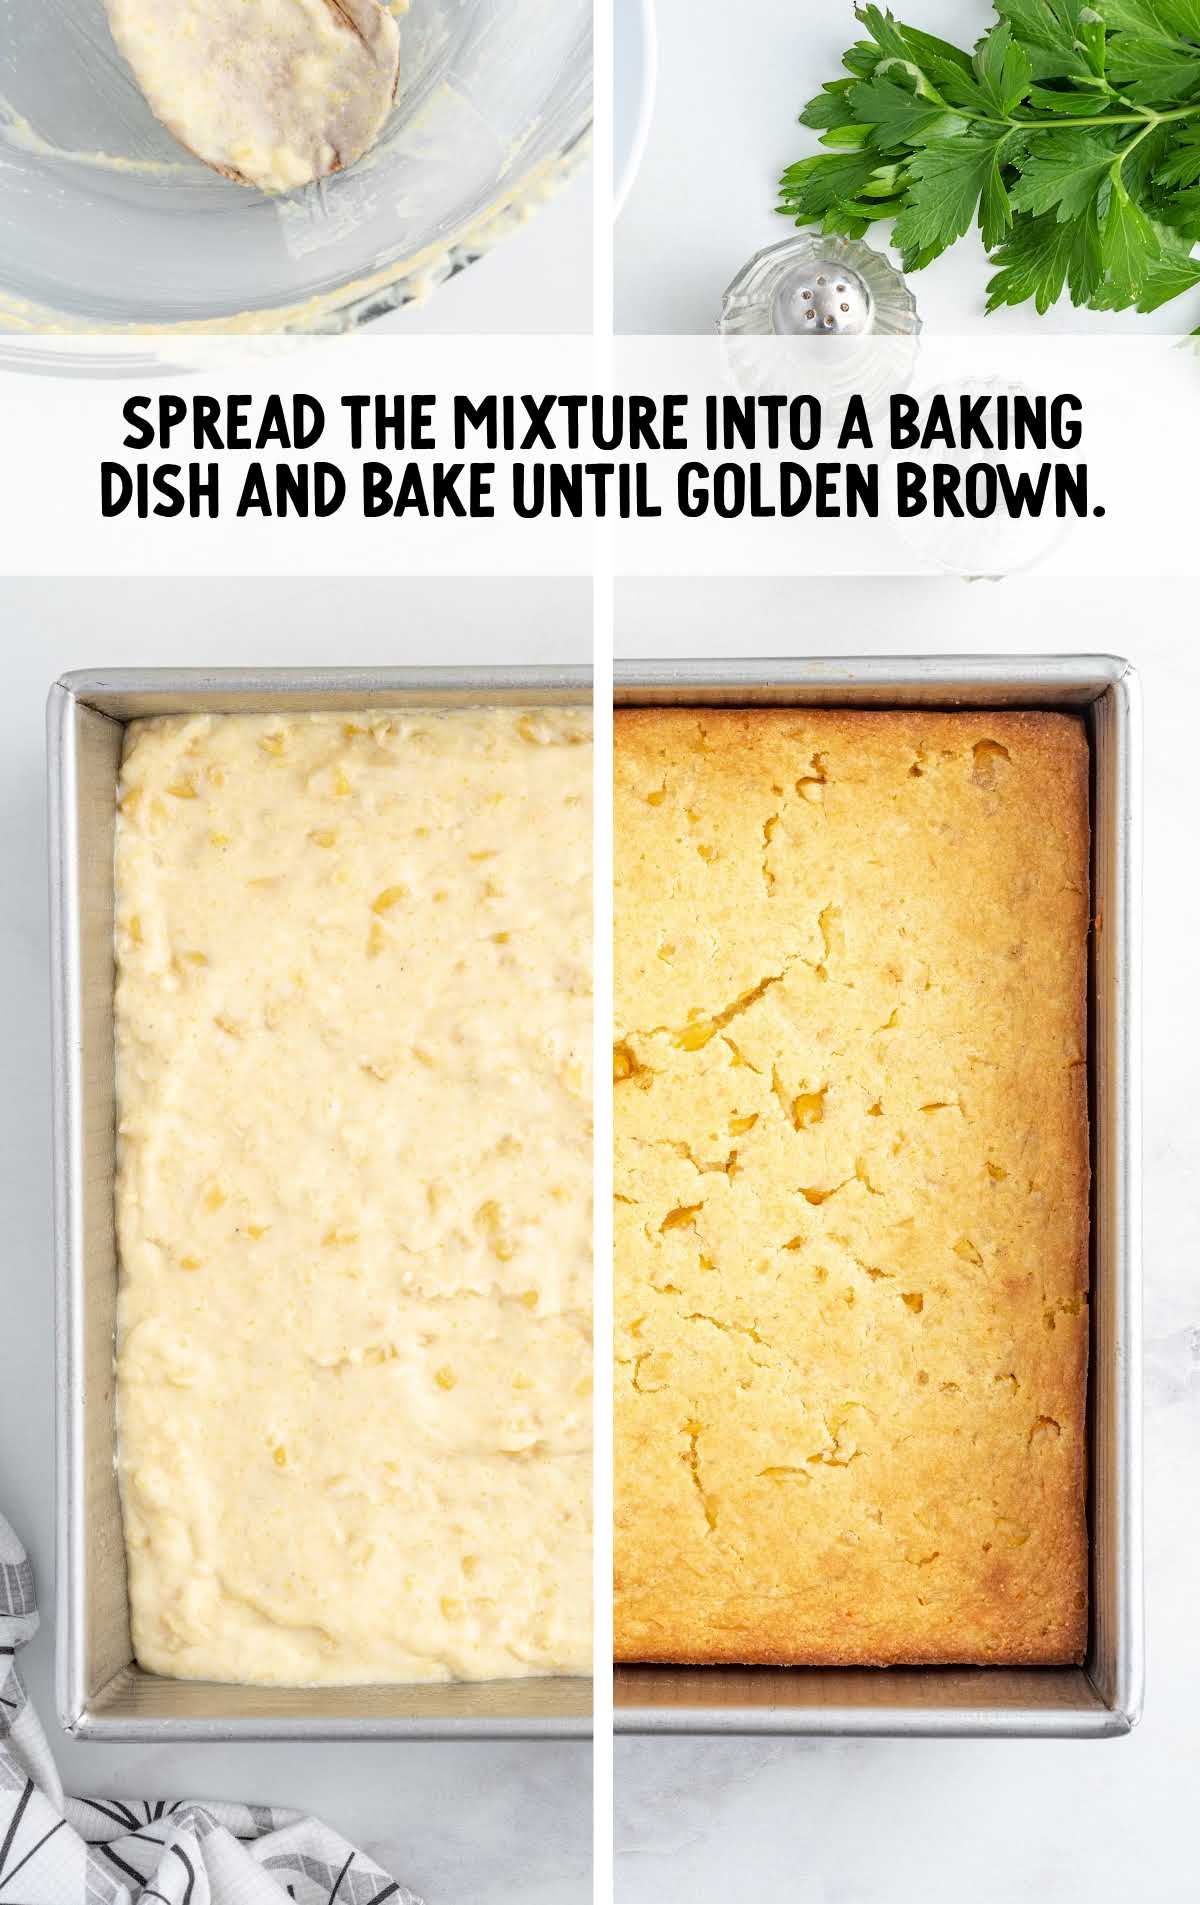 mixture spread into the baking dish and baked